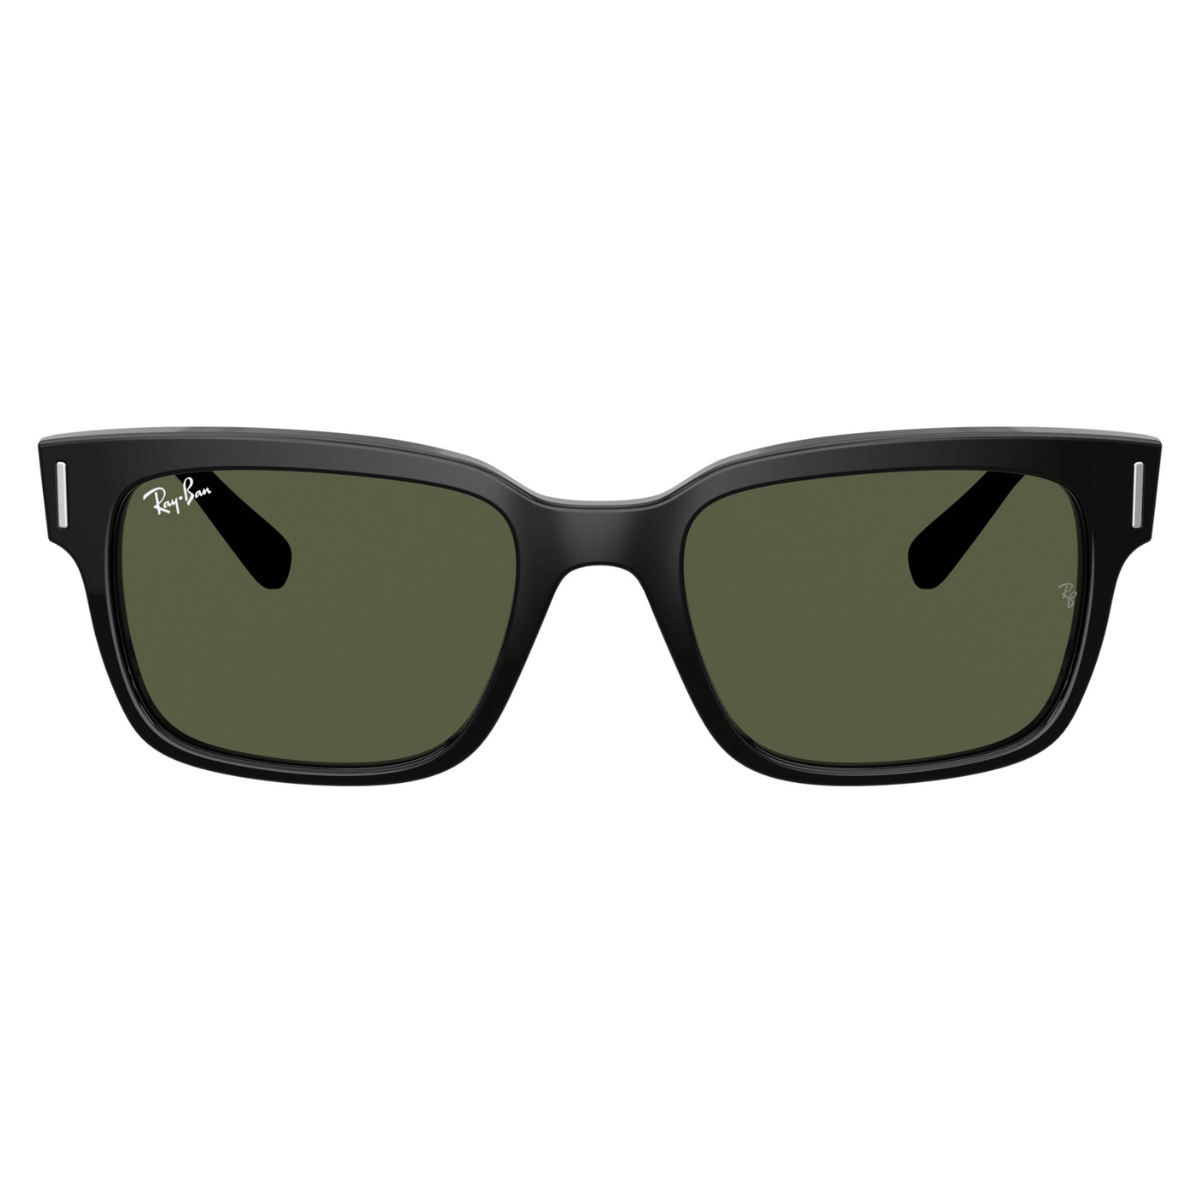  "Stylish Jeffrey Sunglass by Ray-Ban in shiny black, perfect for men seeking square frames, available at Optorium."